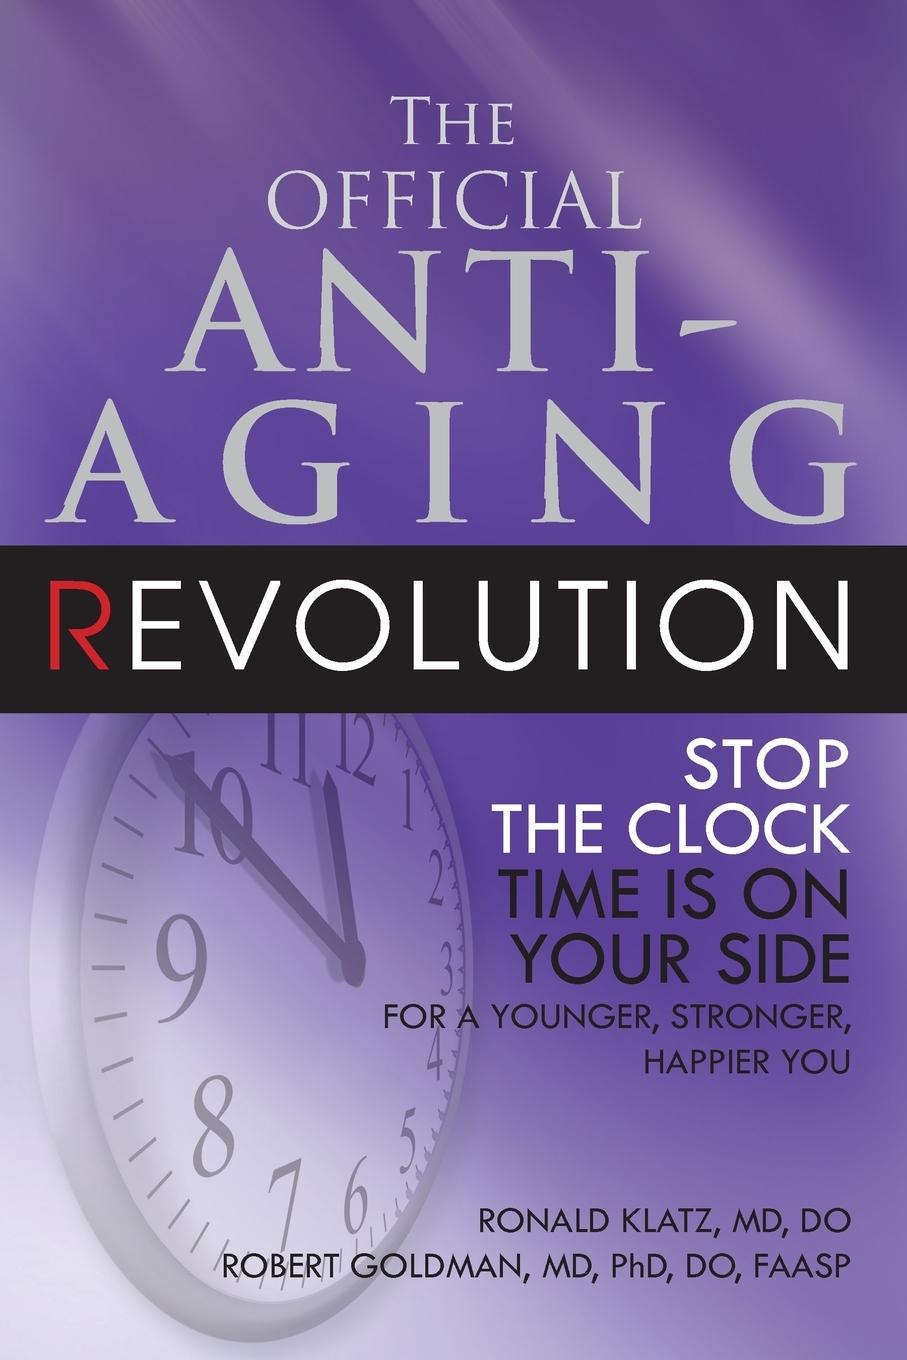 The Official Anti-Aging Revolution, Fourth Ed.: Stop the Clock: Time Is on Your Side for a Younger, Stronger, Happier You - Klatz, Ronald|Goldman, Robert